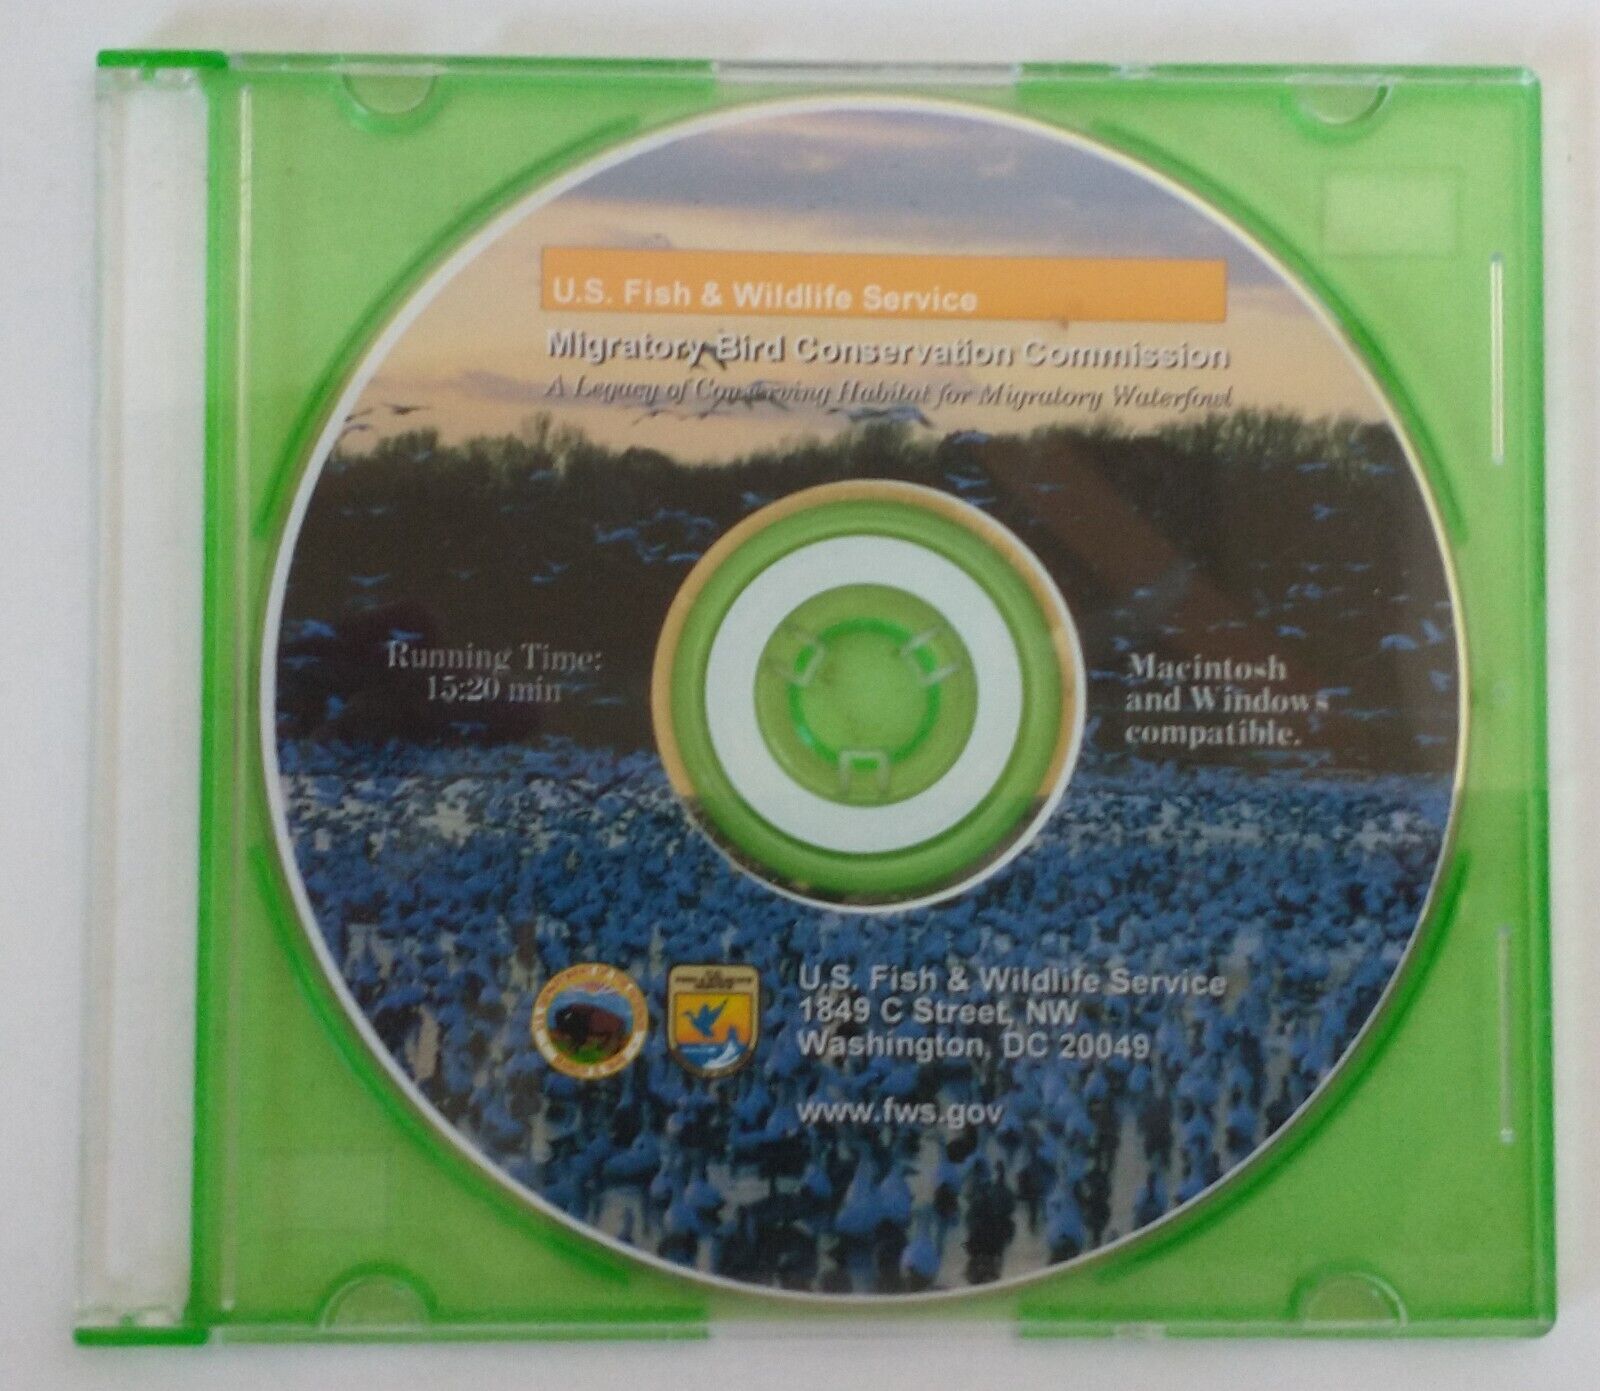 US Fish & Wildlife Service - Migratory Bird Conservation Commission Video CD-ROM